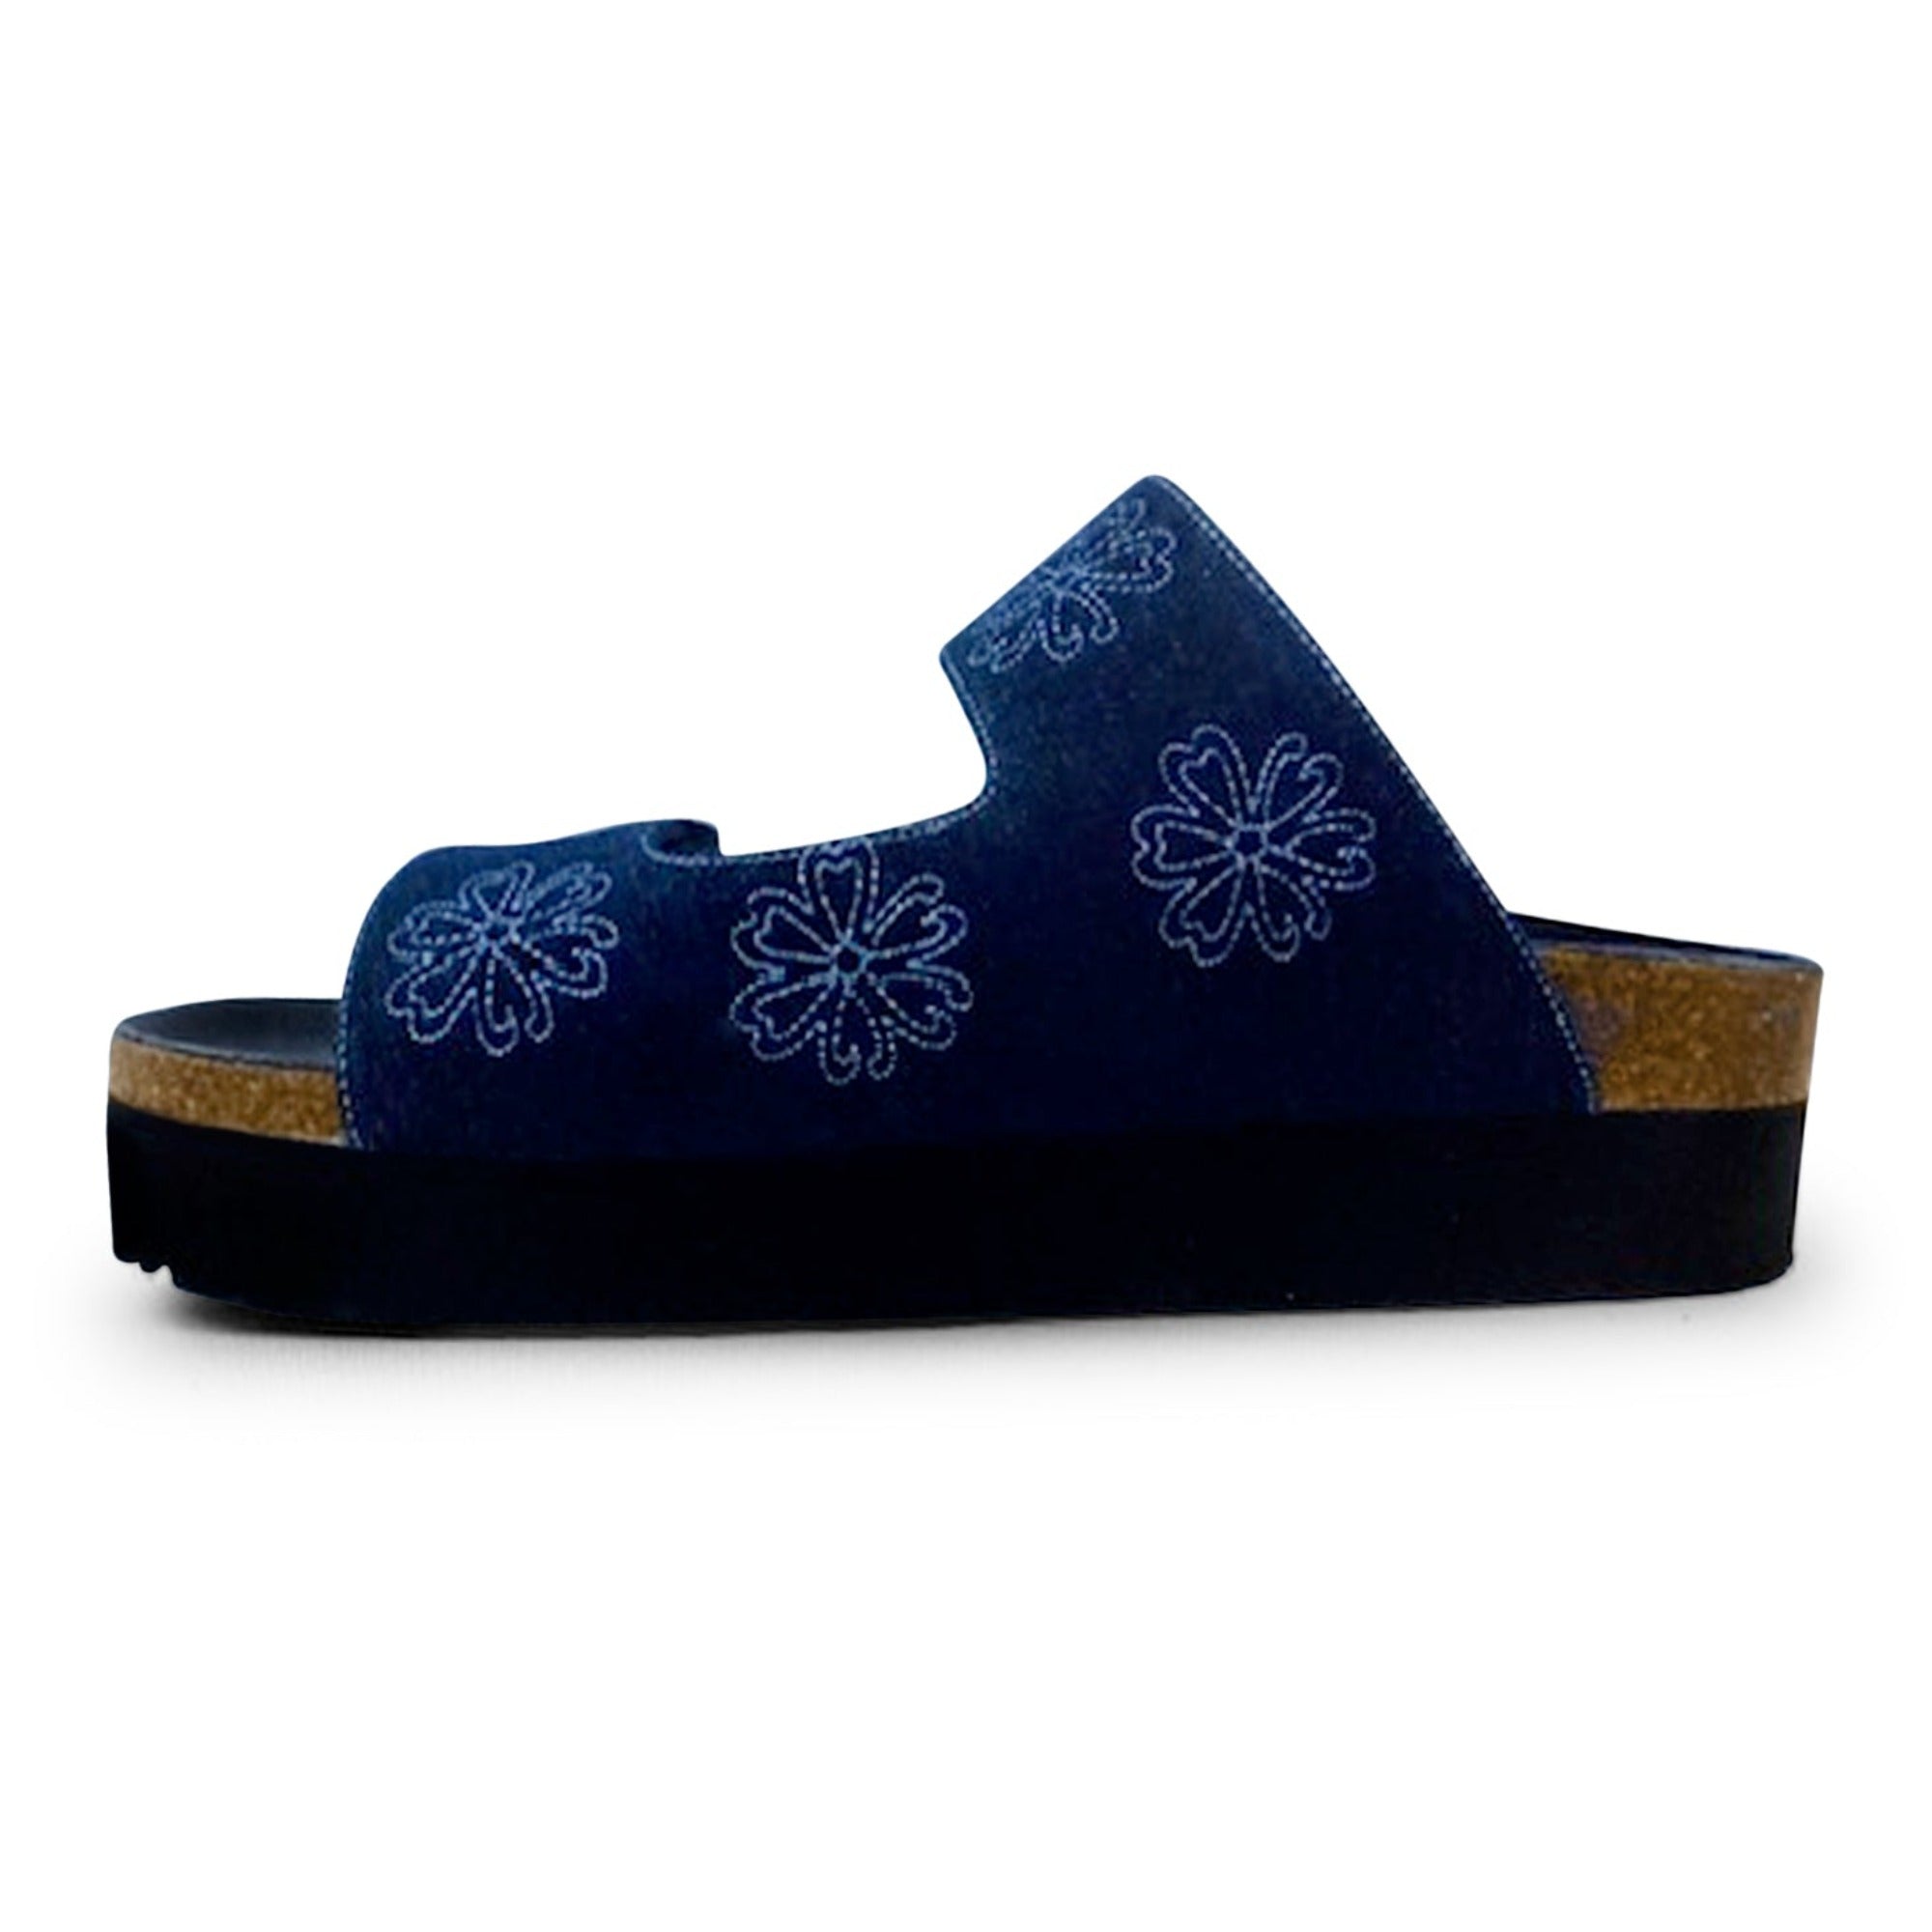 Jean slide with flower embroidery